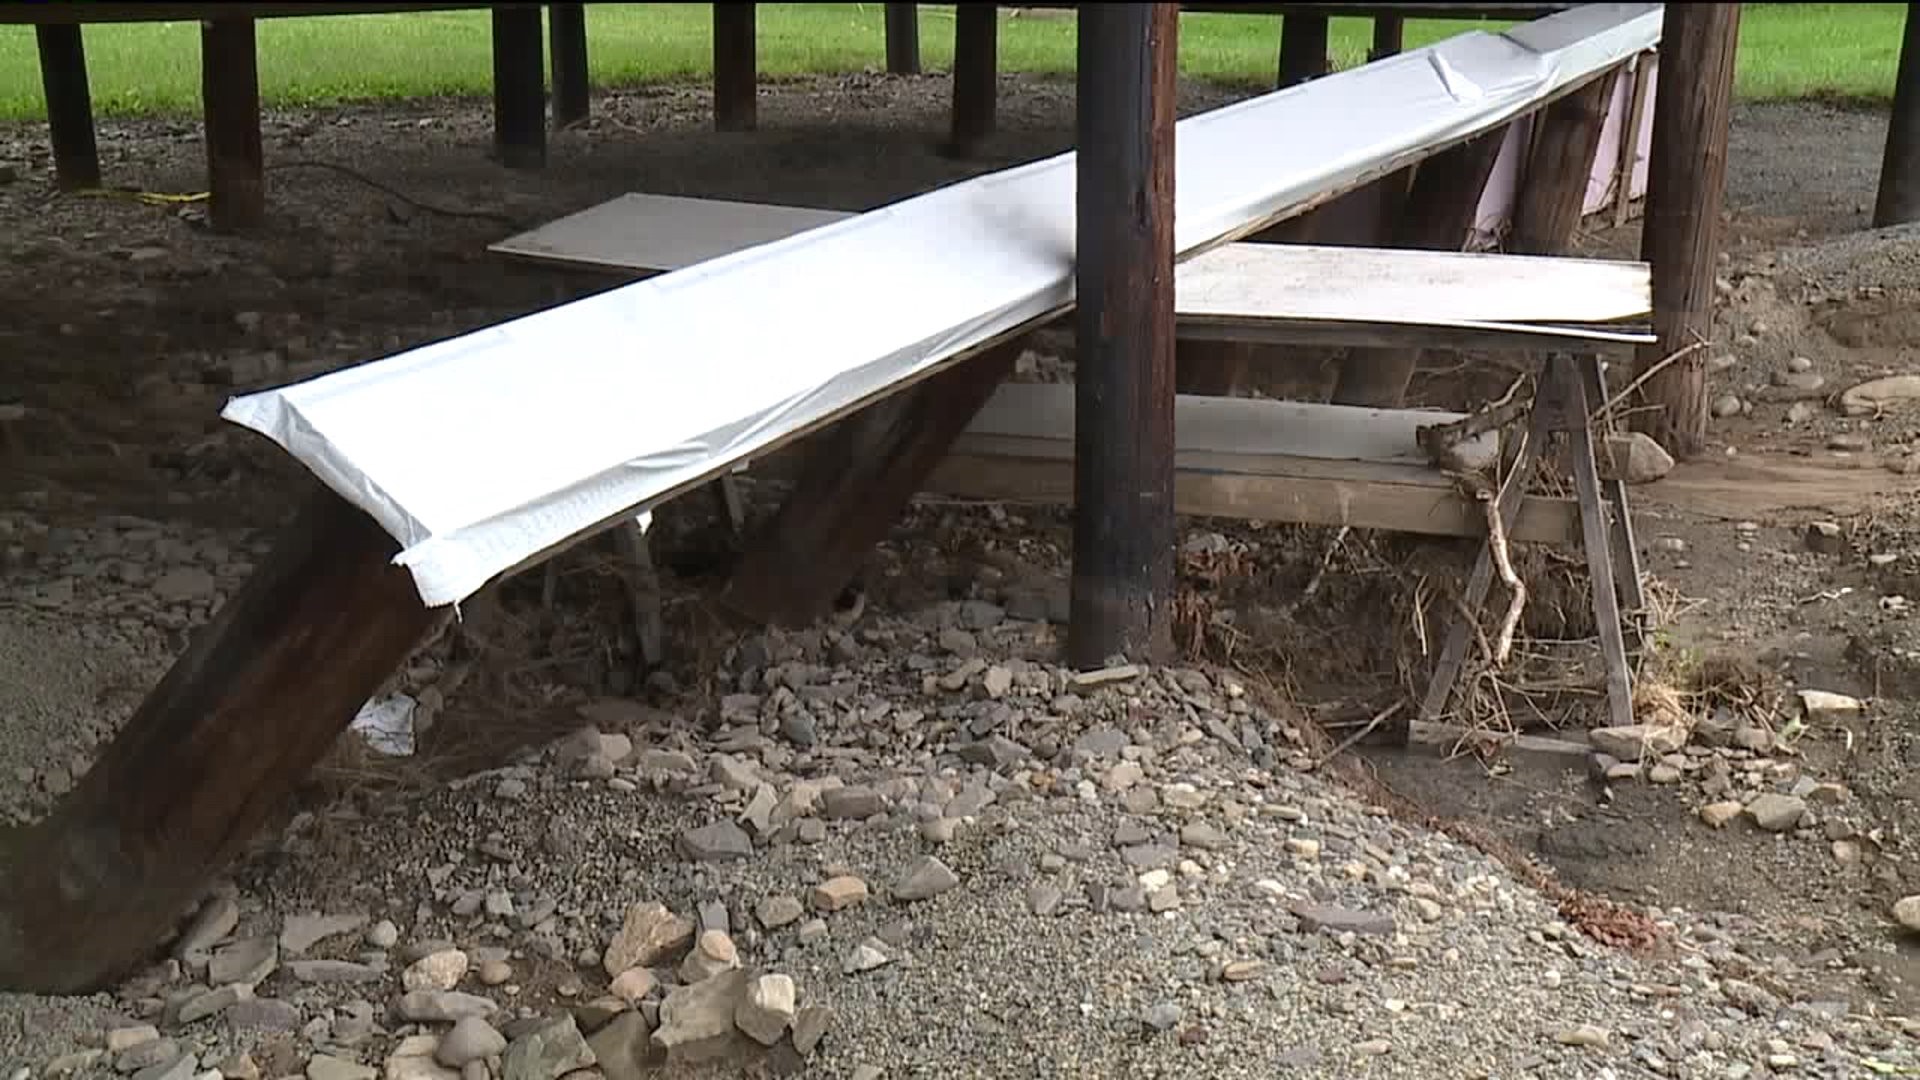 Fire Company Under Pressure to Recover from Flood Damage Before Winter Hits